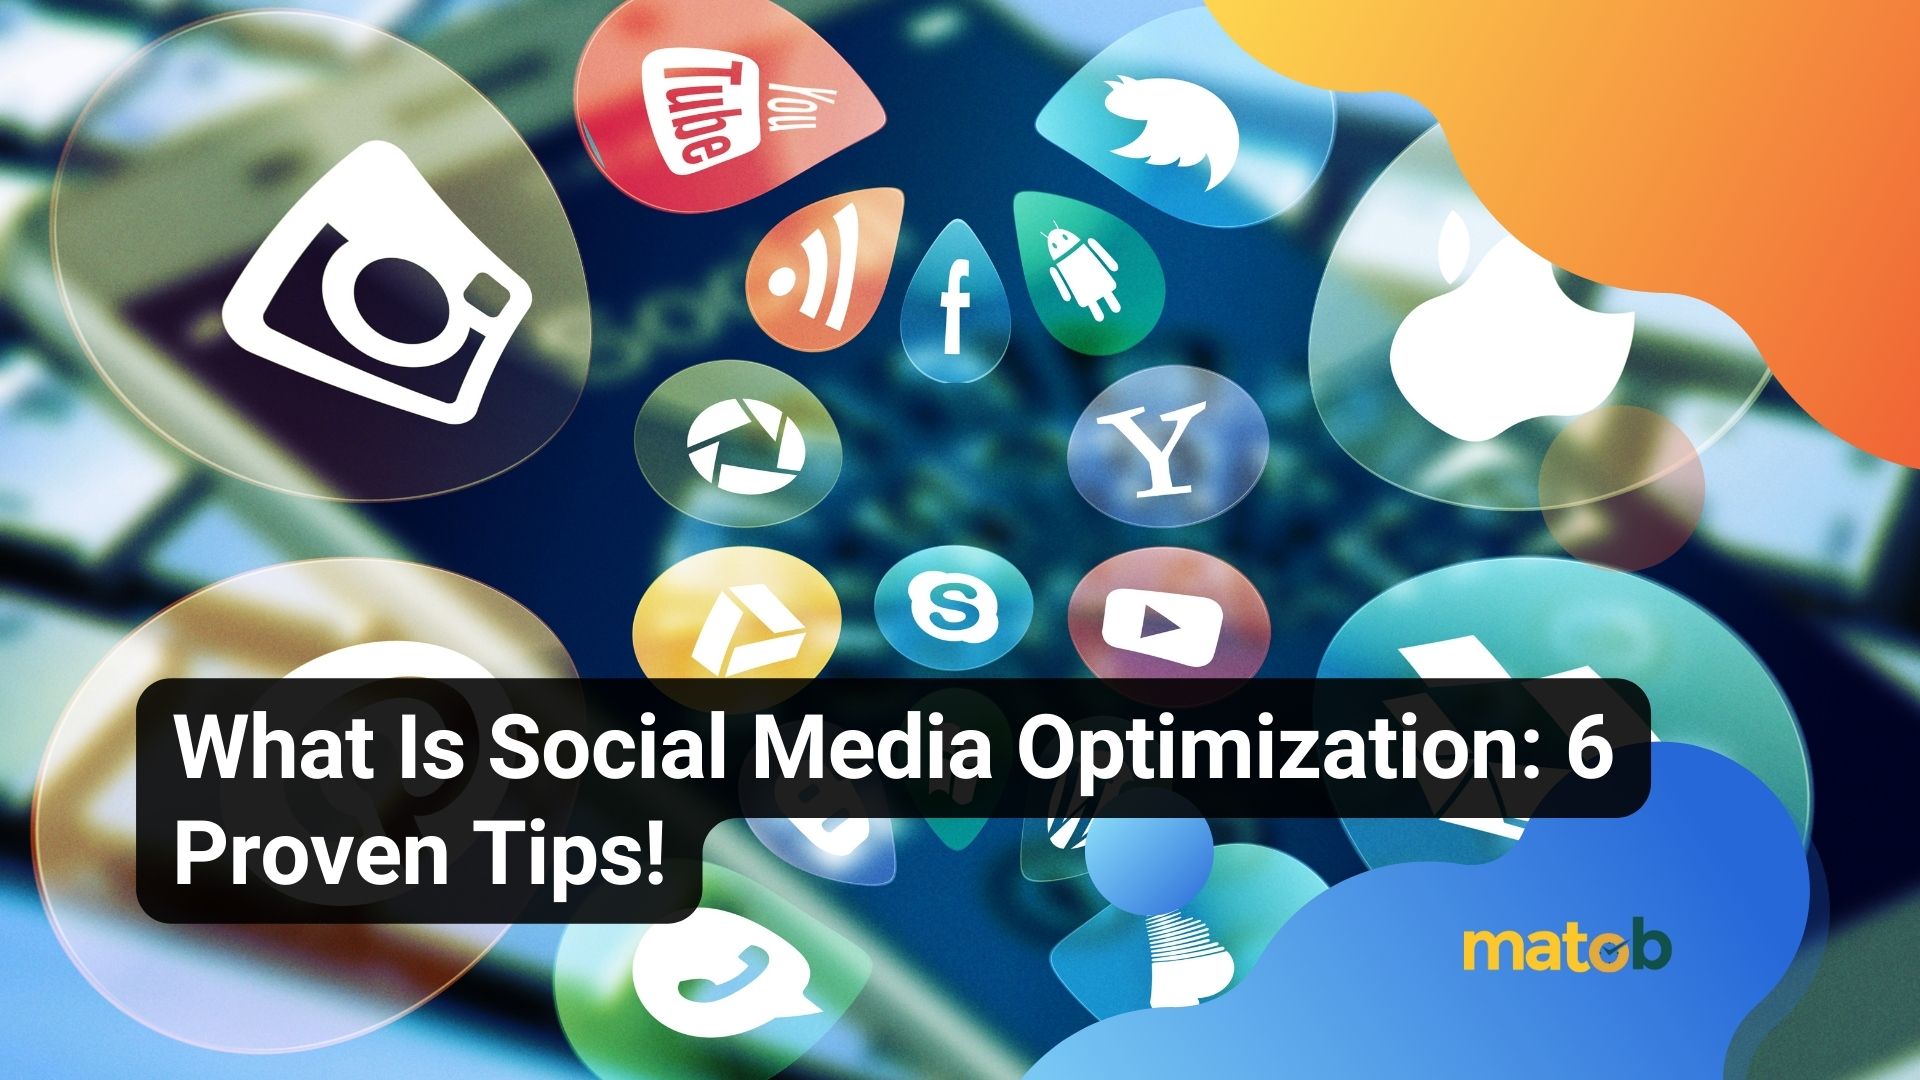 What Is Social Media Optimization: 6 Proven Tips!